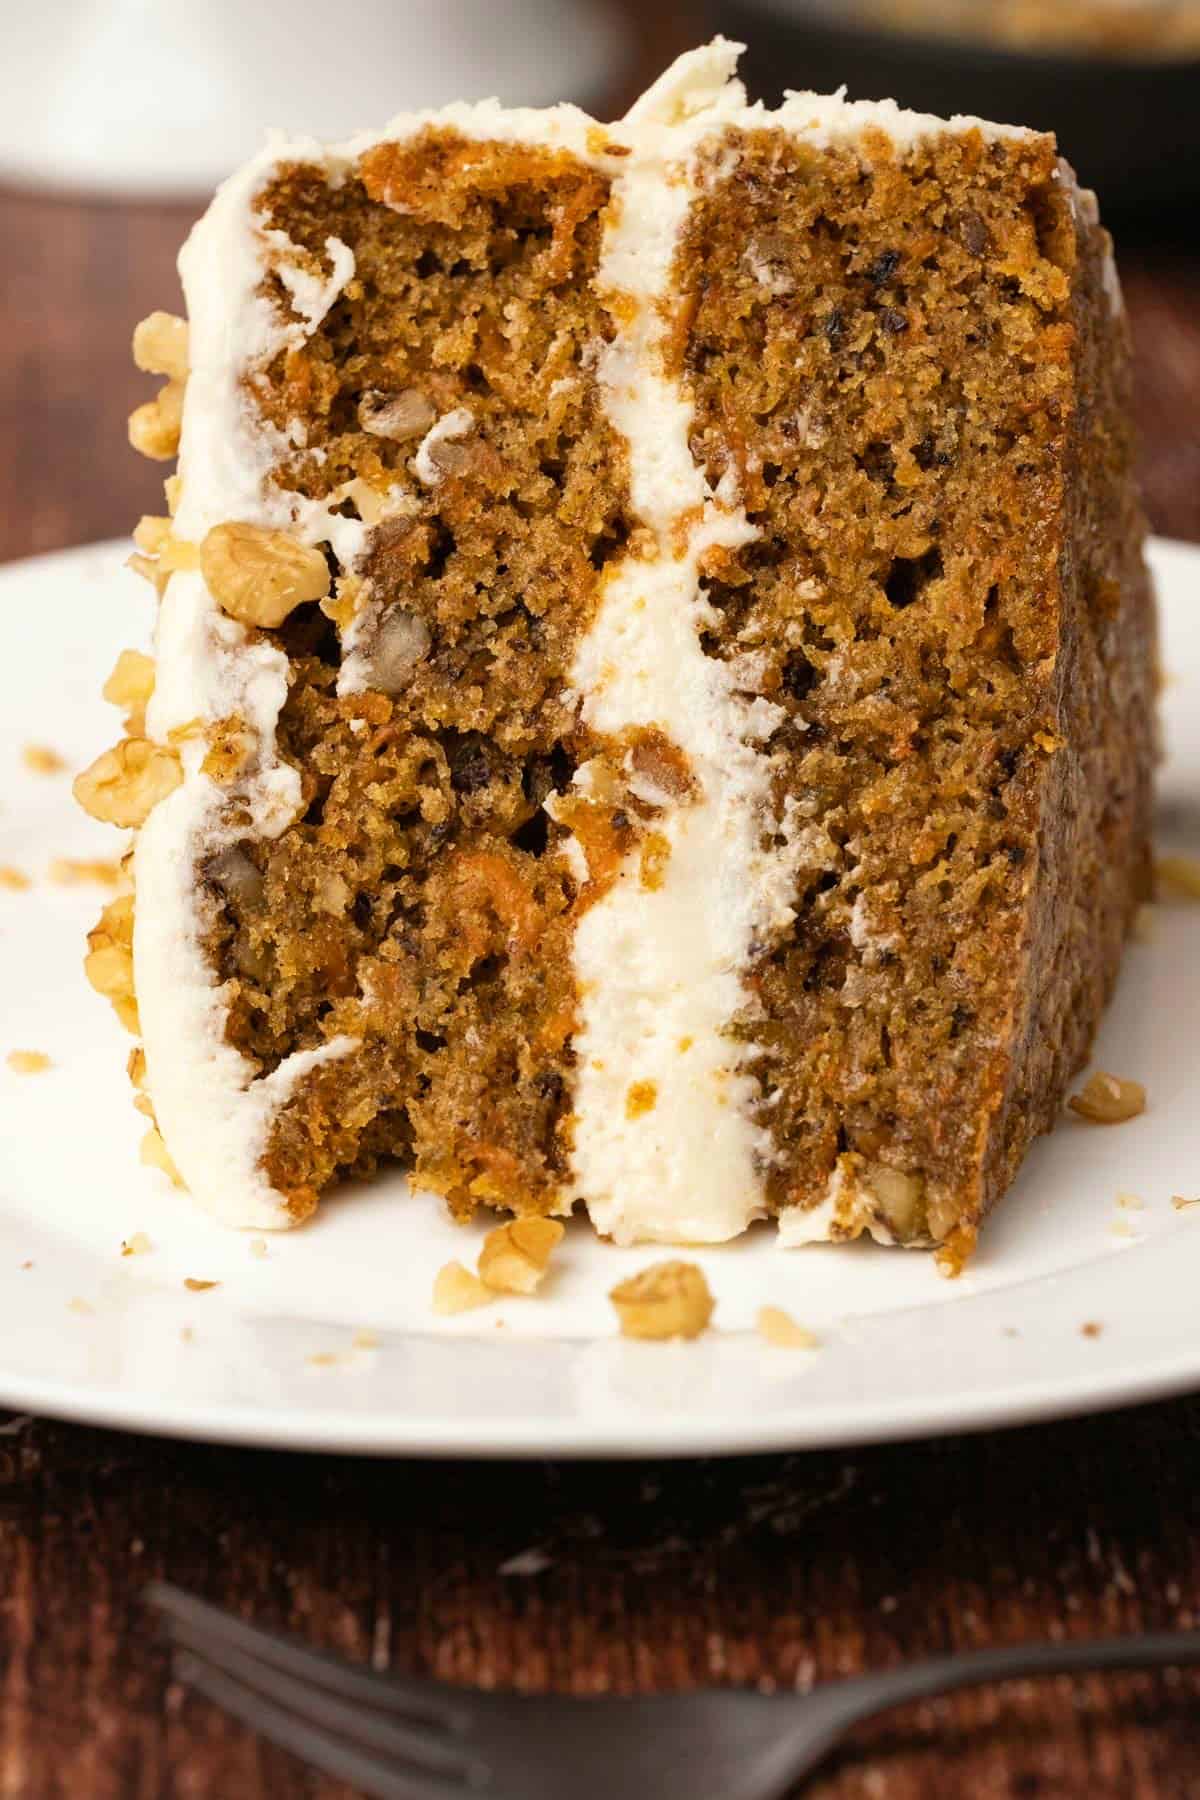 Slice of carrot cake on a white plate.